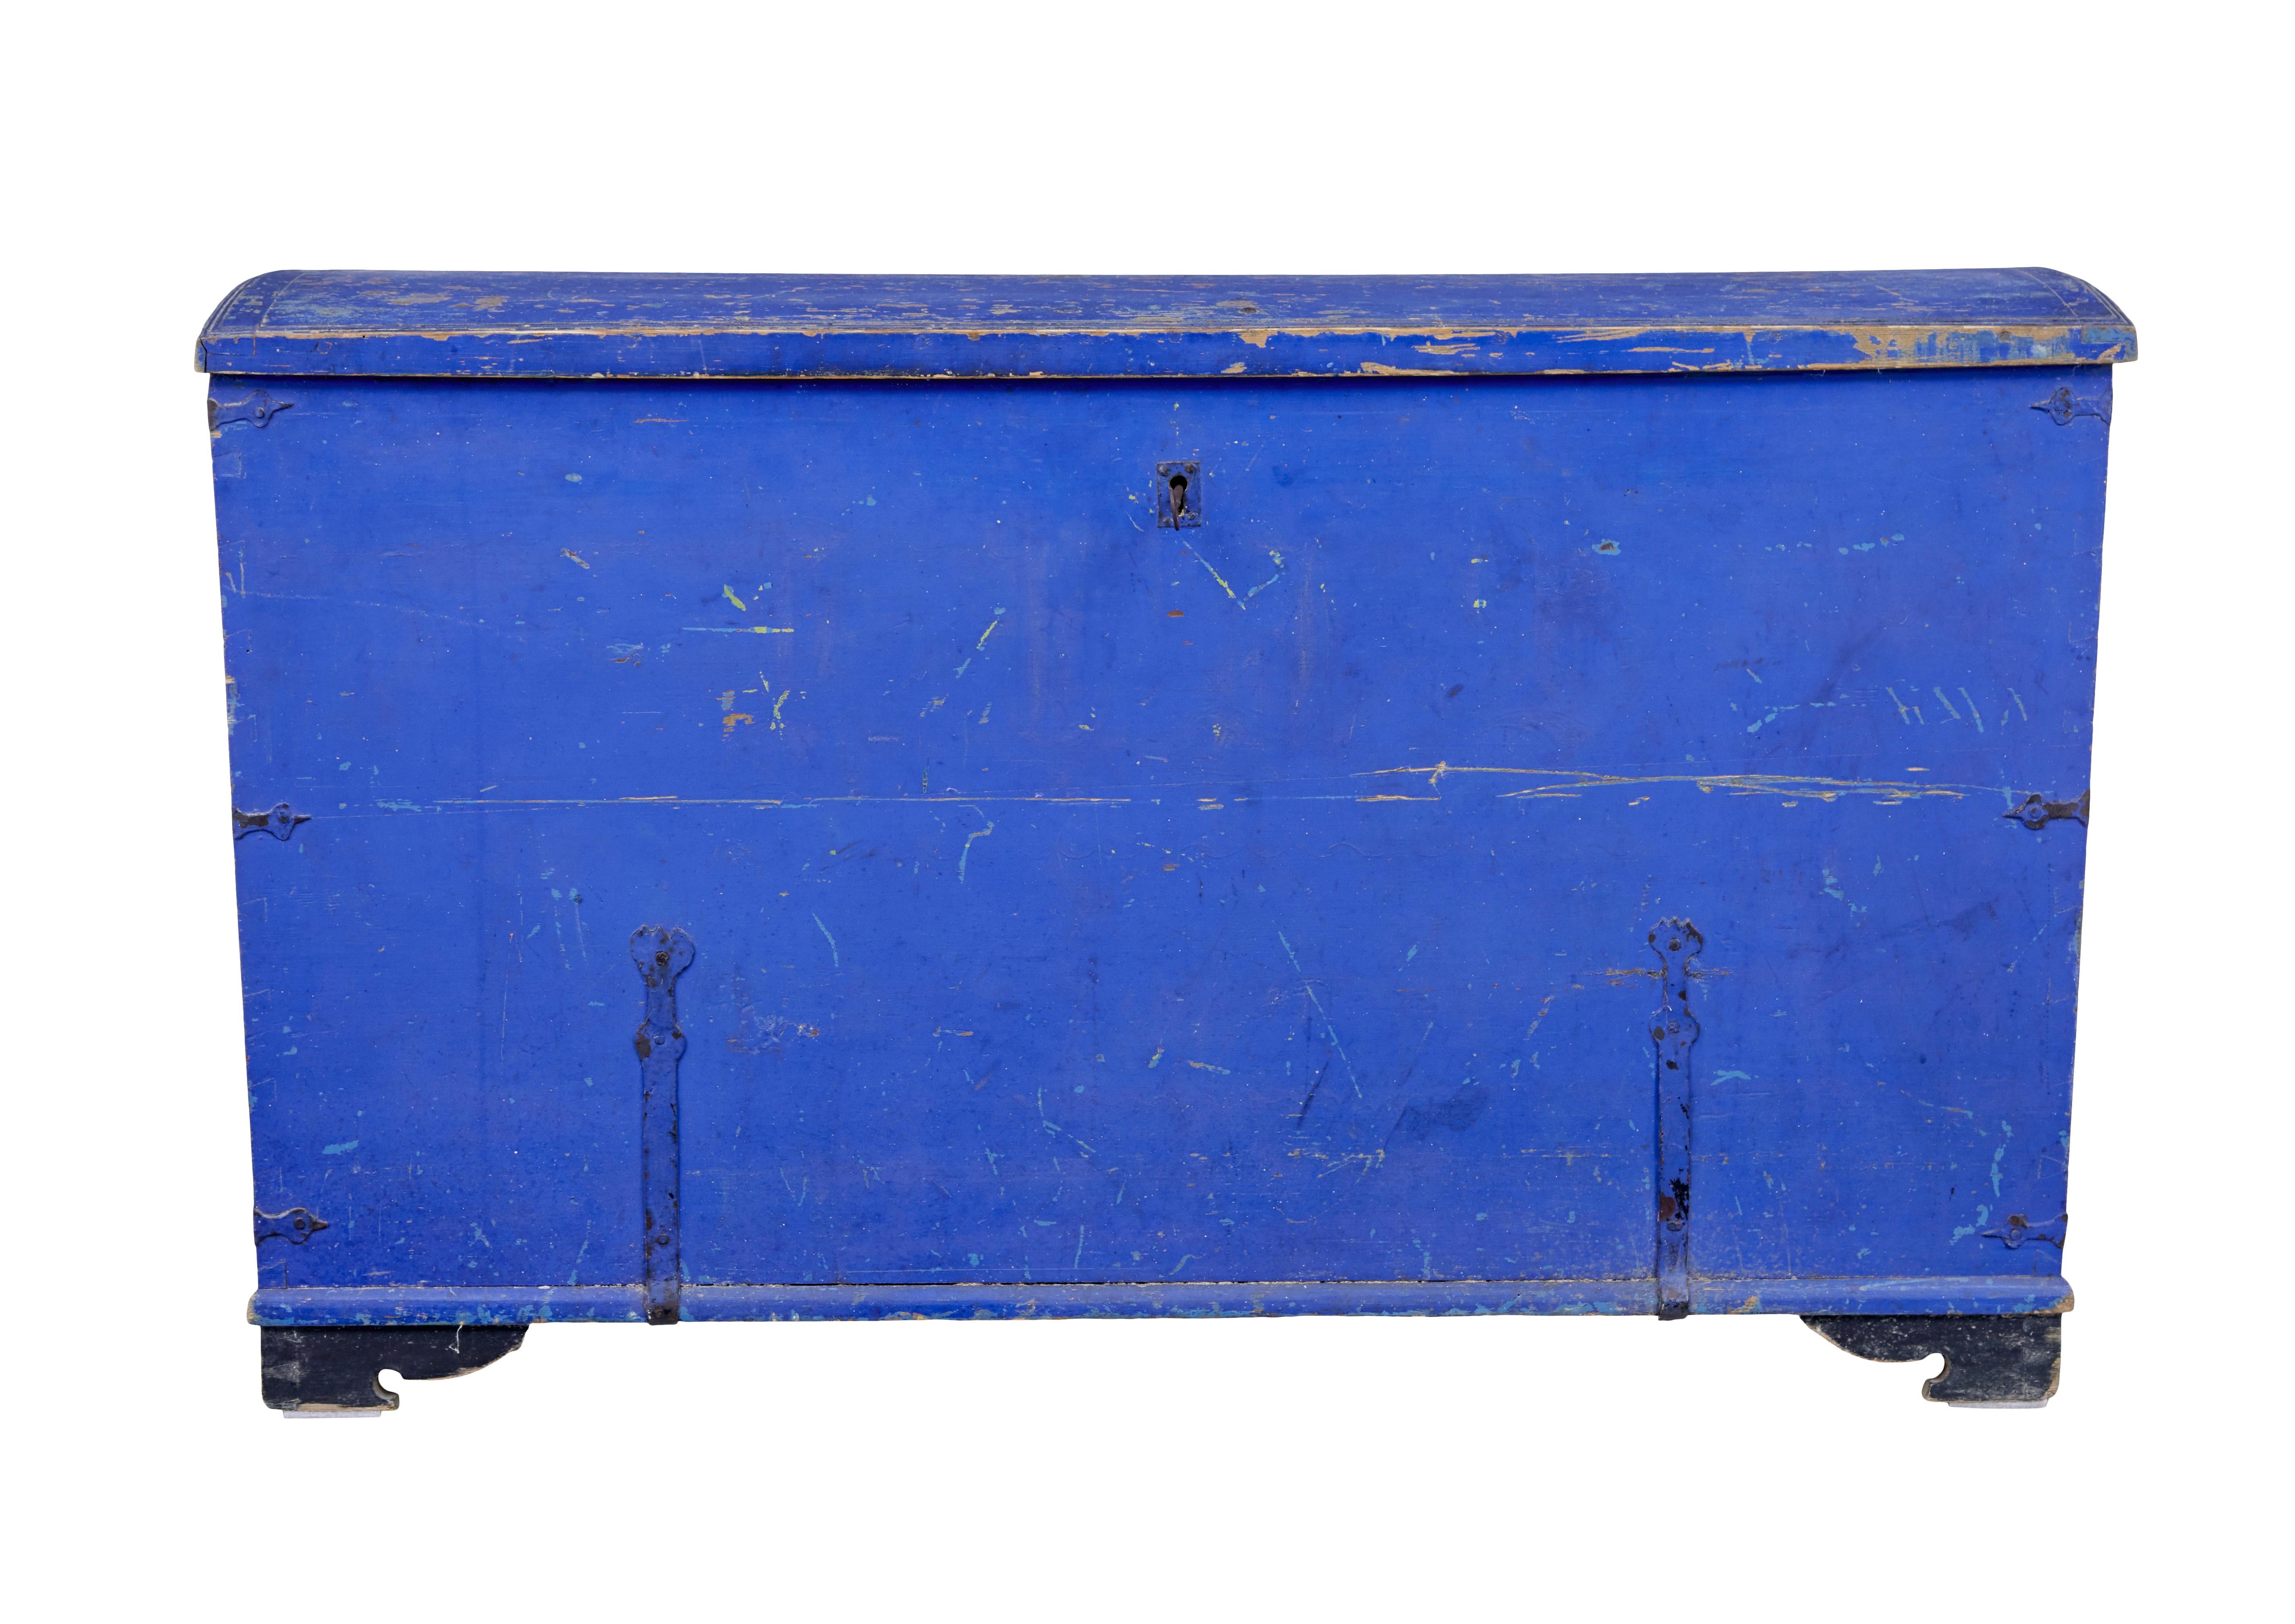 Rustic swedish painted pine blanket box circa 1866.

Signed with a name inside the lid and a date of 1866.  Painted in a period vivid blue colour and black painted bracket feet.

Metal handles to each side, with metal decorative strap work. 